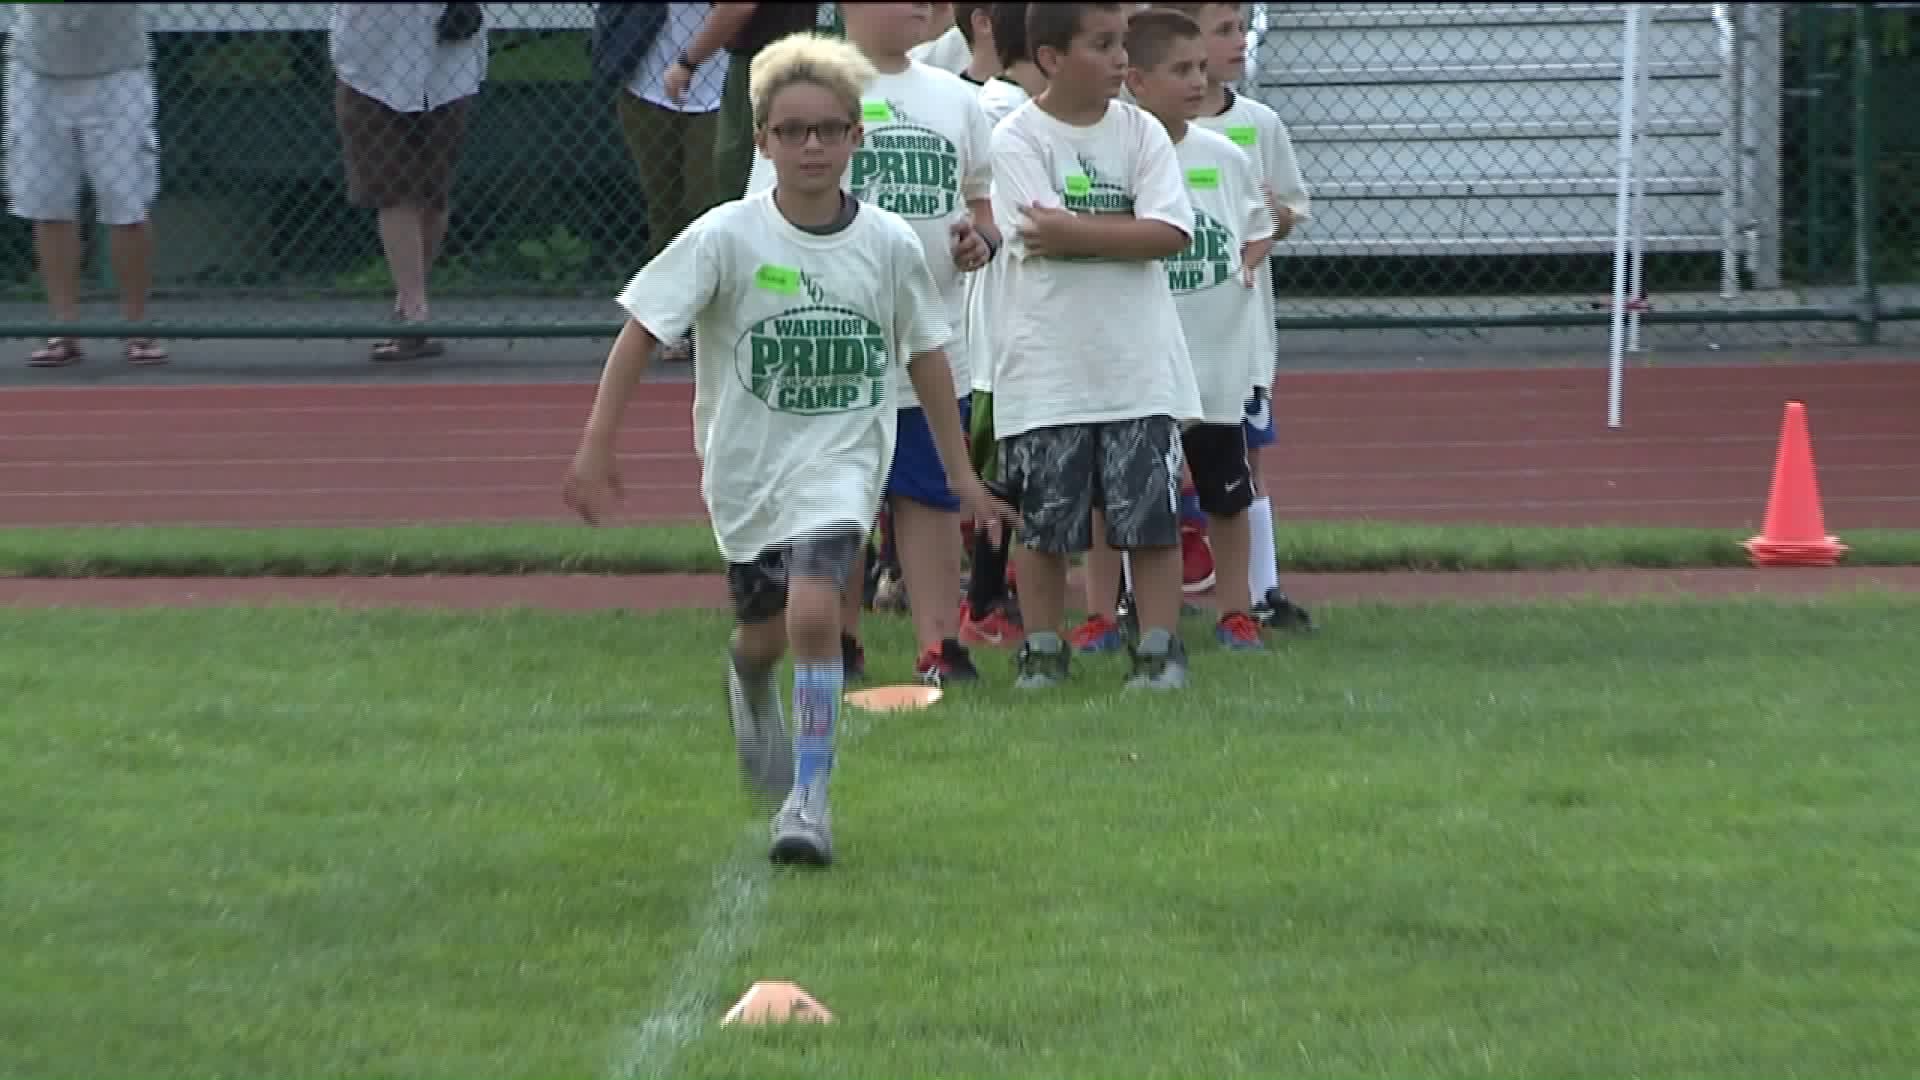 Wyoming Area Holds Warrior Pride Camp